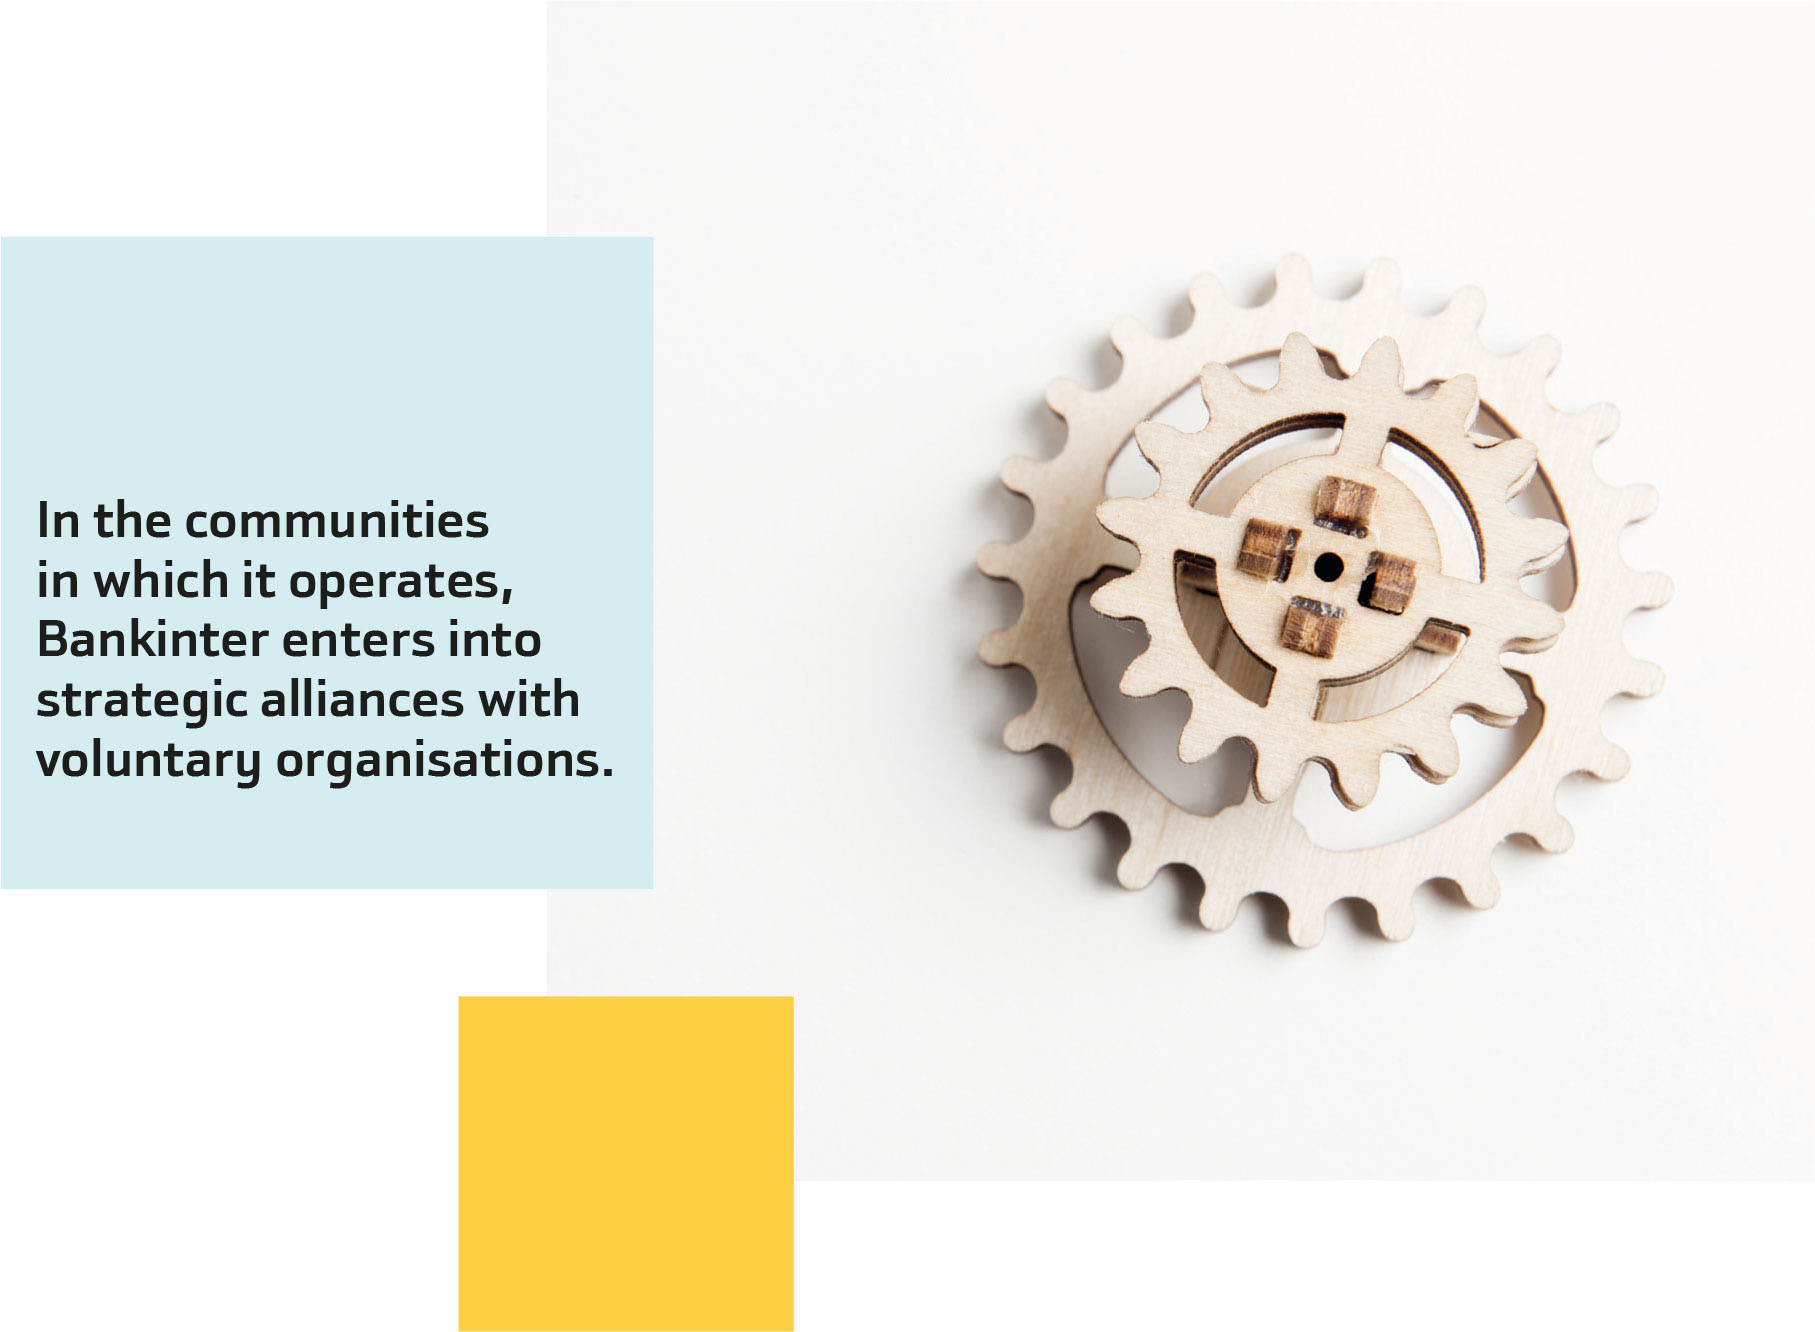 In the communities in which it operates, Bankinter enters into strategic alliances with voluntary organisations.